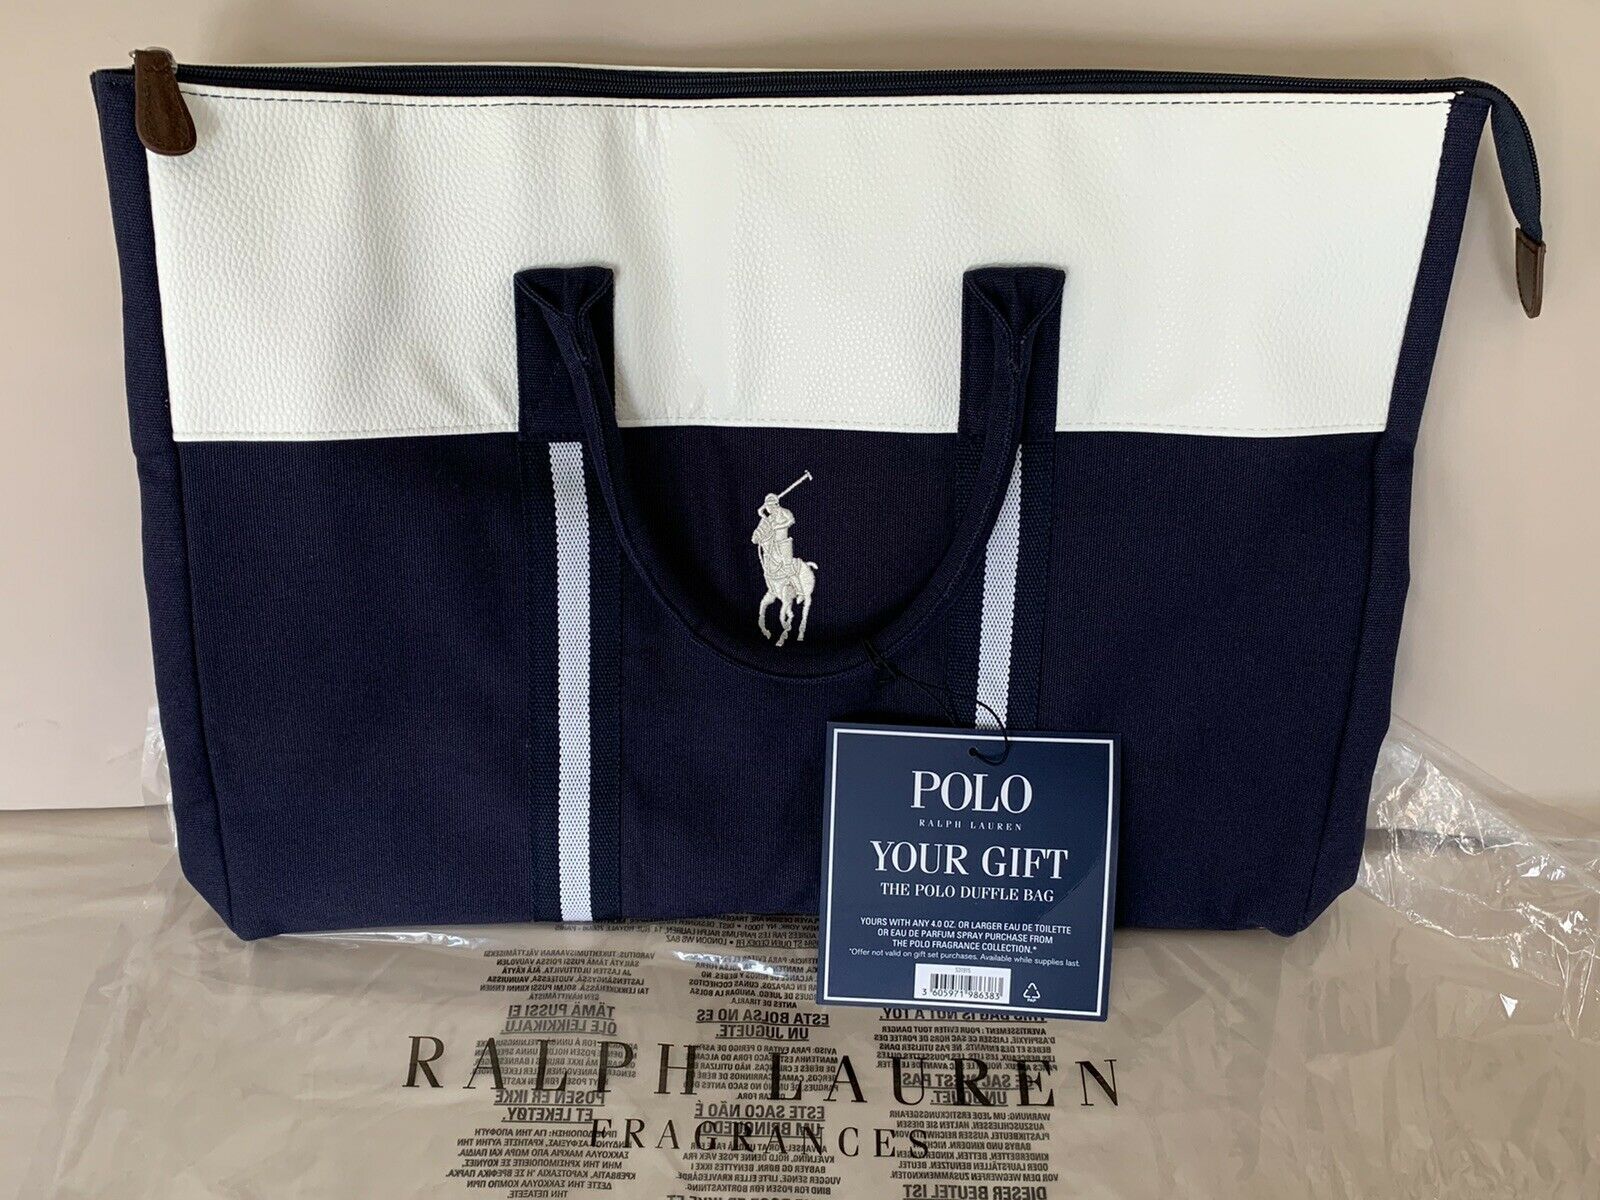 Polo by Ralph Lauren, Bags